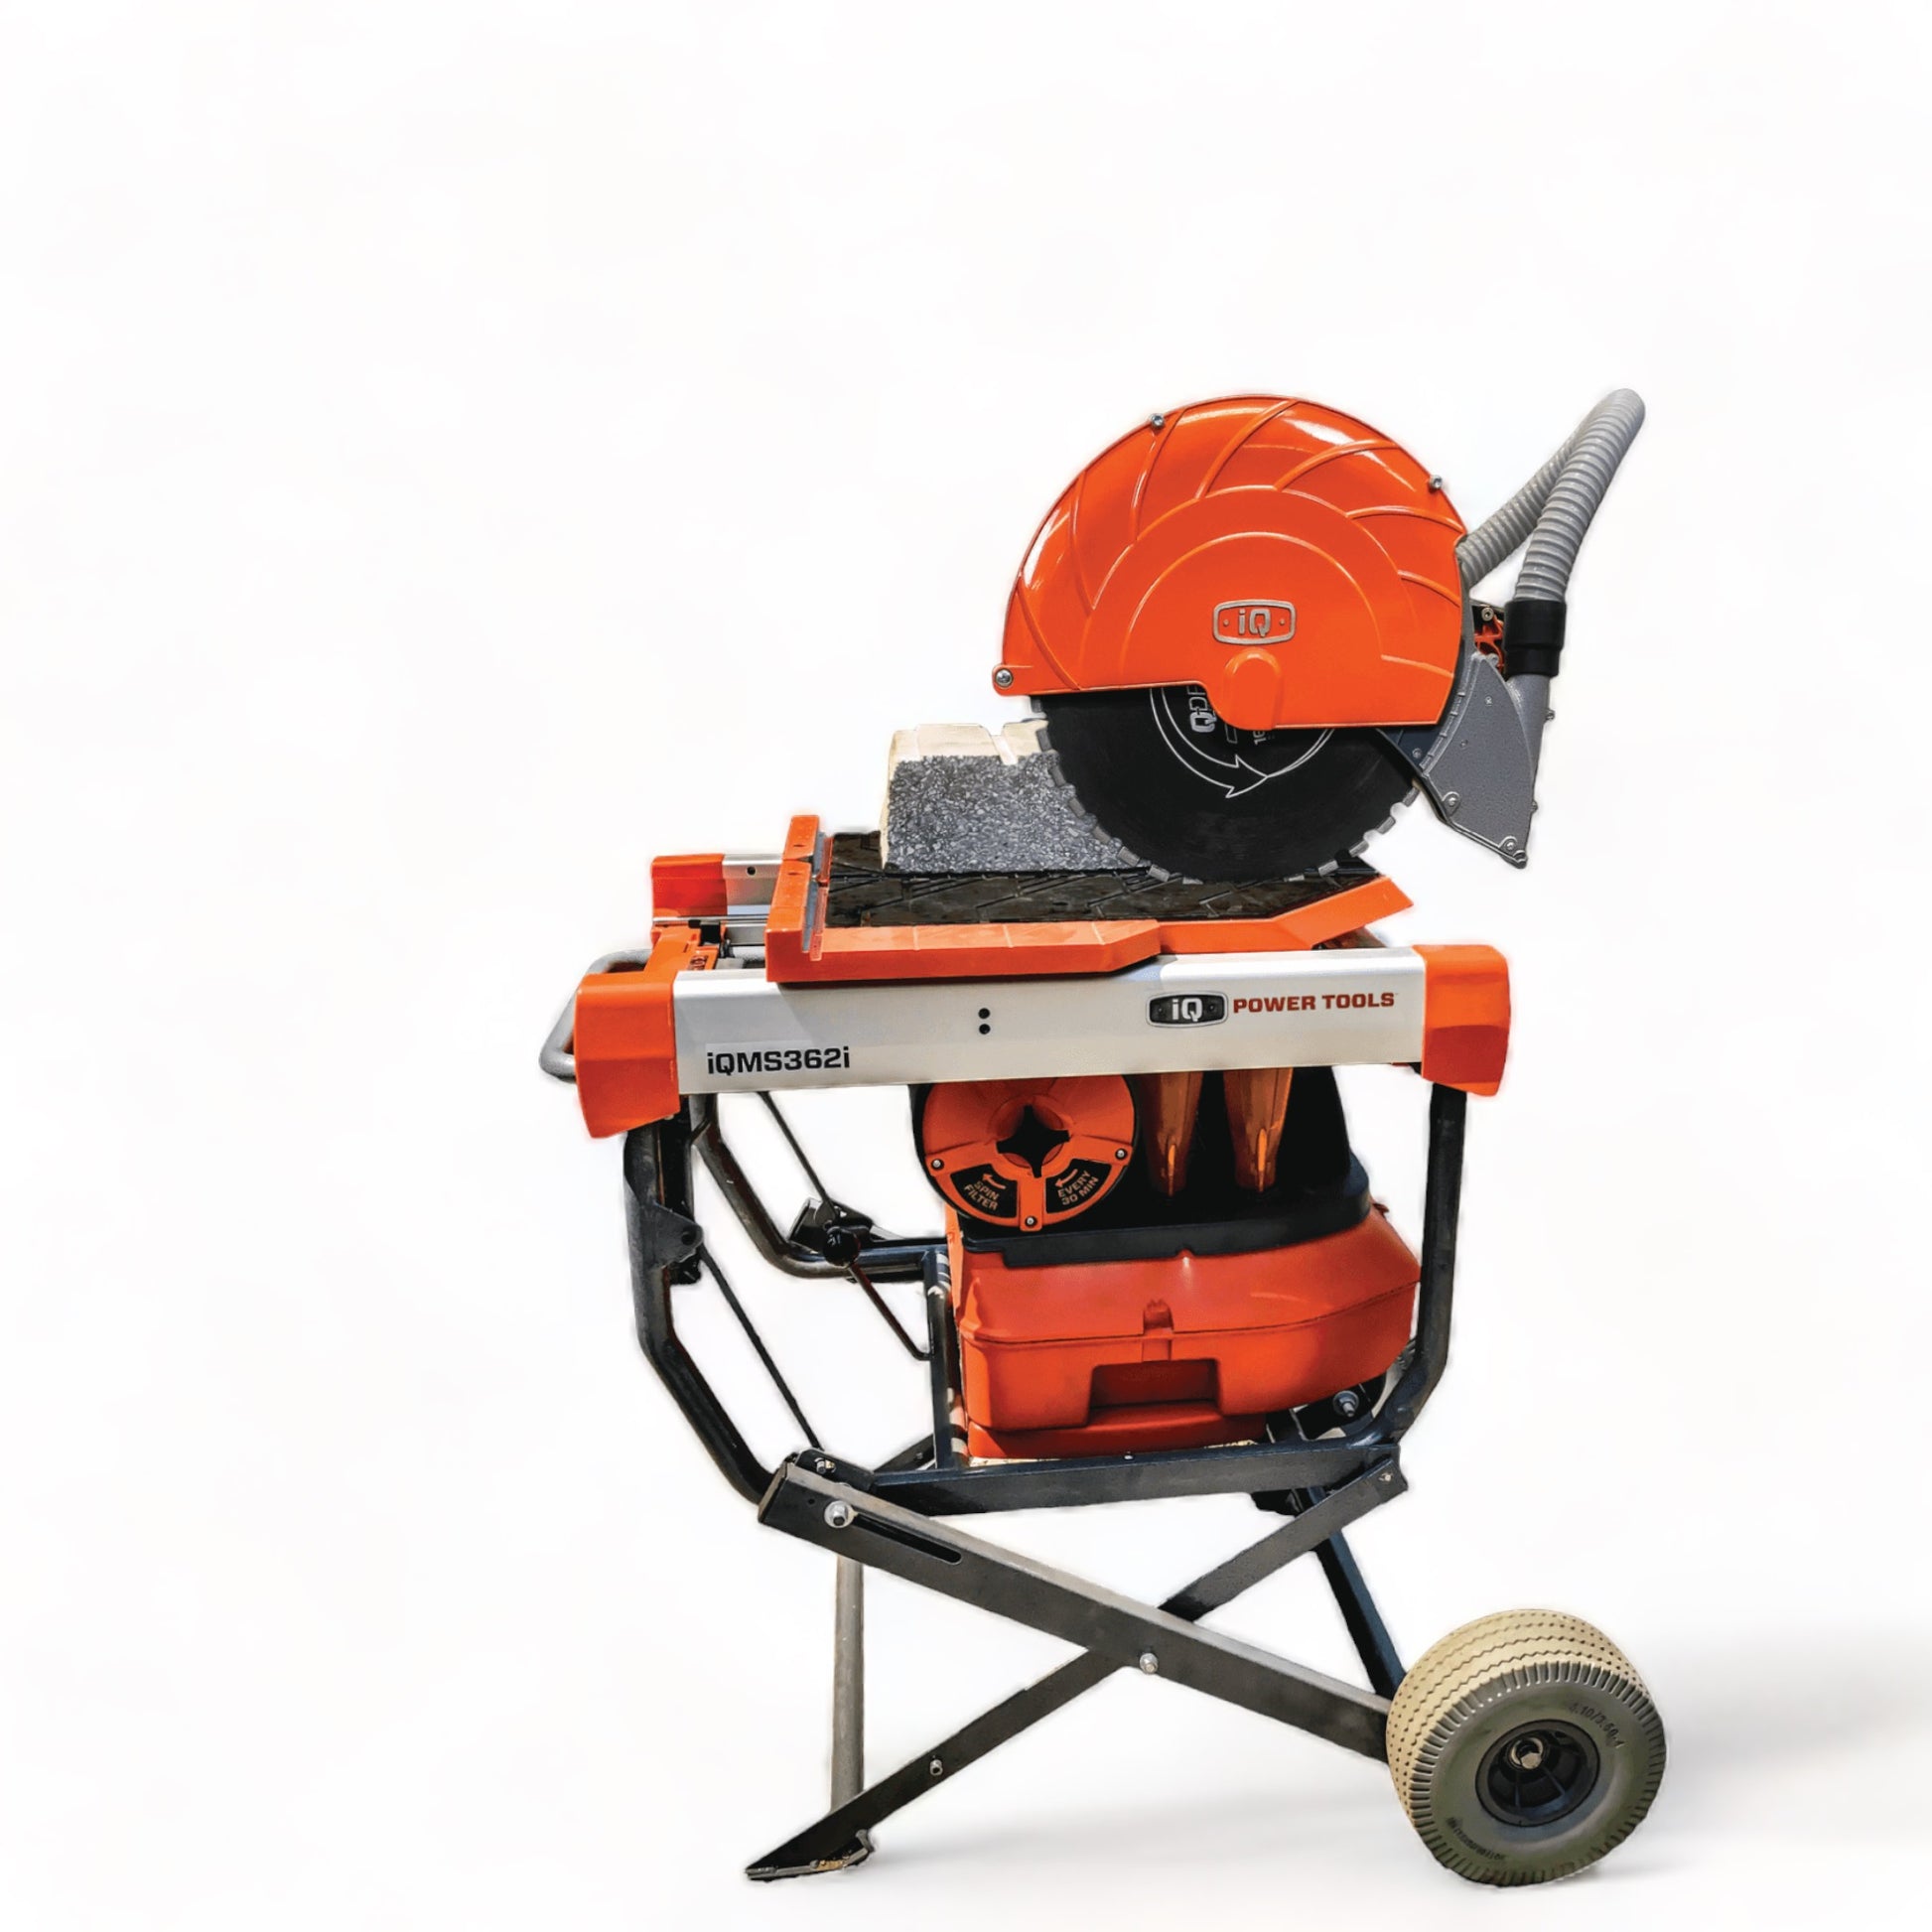 iQMS362 Masonry Saw With Integrated Dust Control System